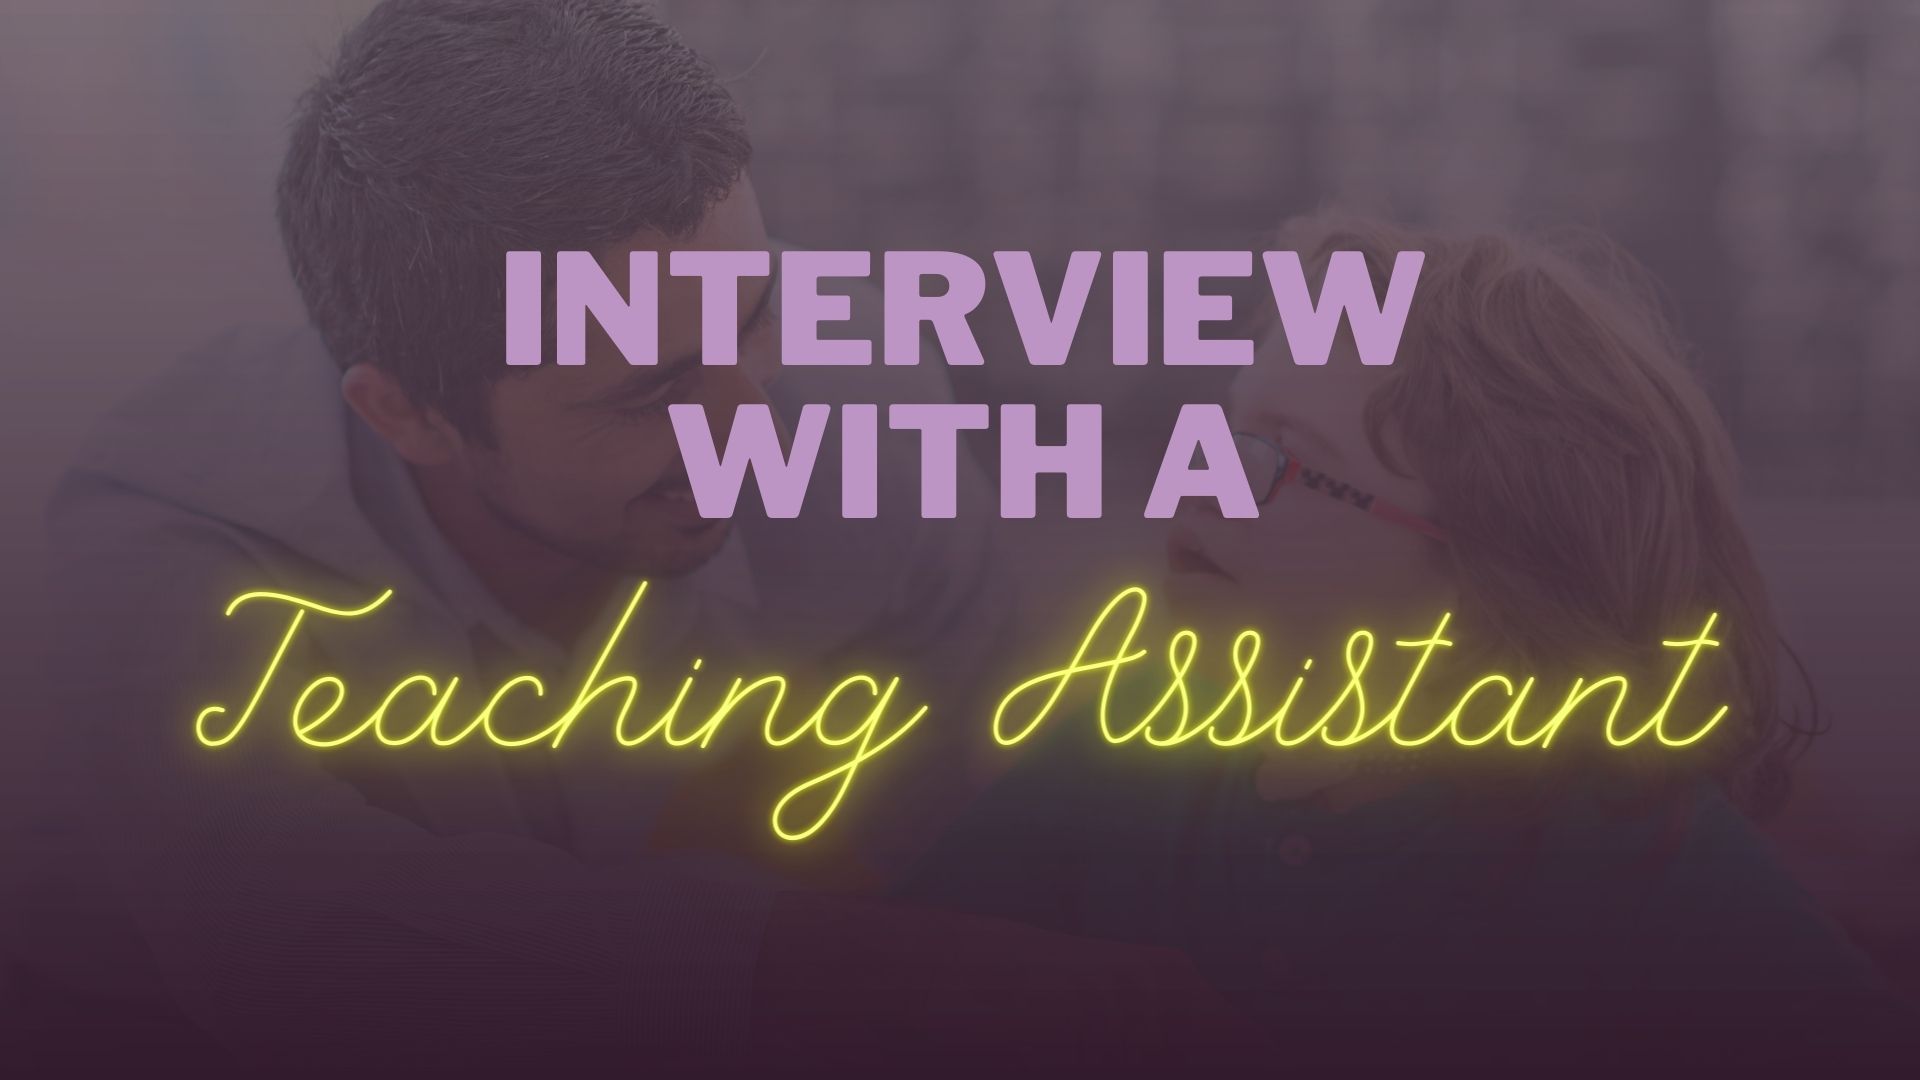 Interview with a Teaching Assistant